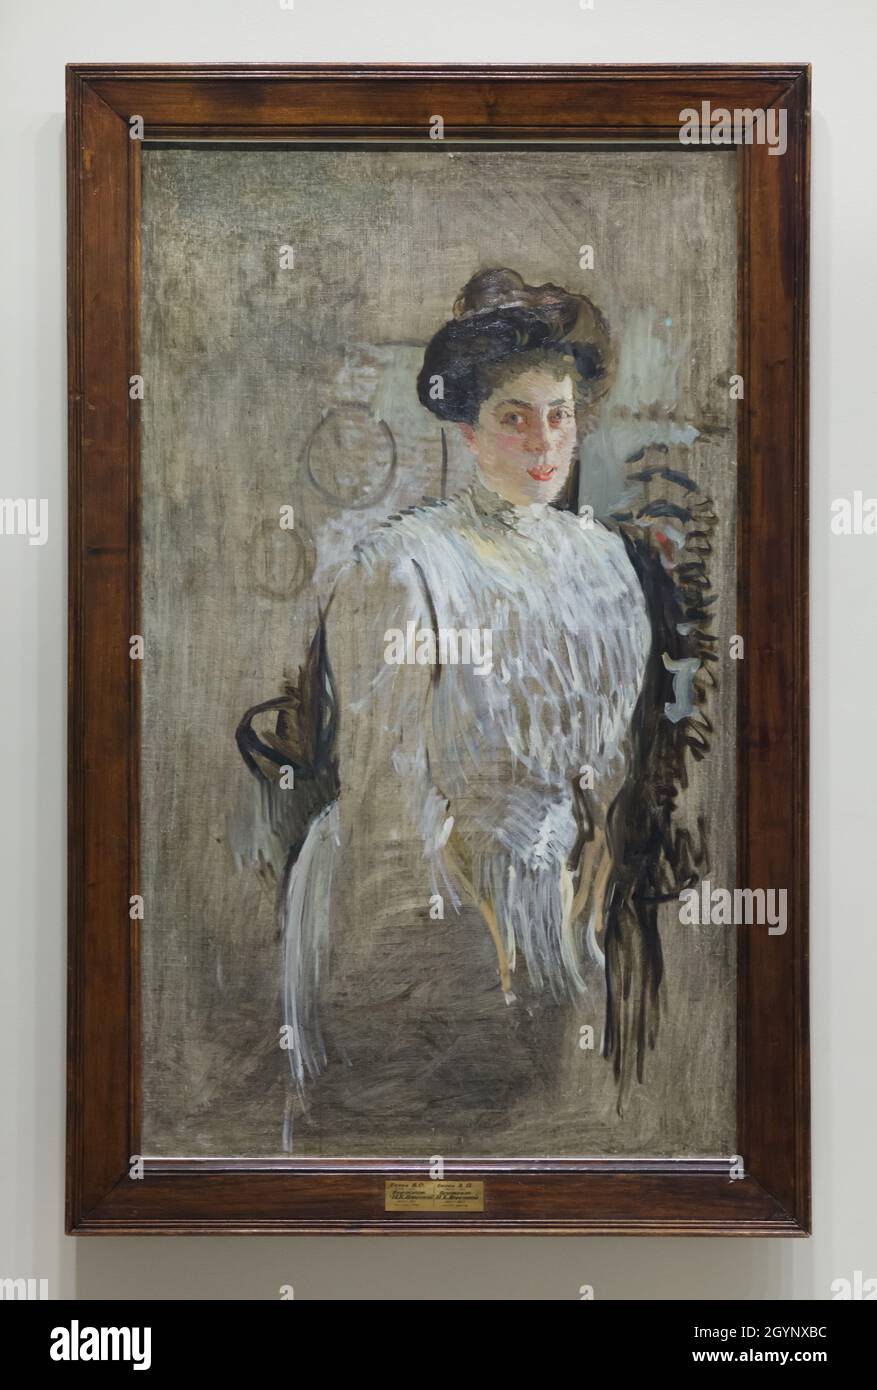 Unfinished painting 'Portrait of Margarita Kirillovna Morozova' by Russian Impressionist painter Valentin Serov (1910) on display at the exhibition 'Icons of Modern Art from the Morozov Collection' in the Fondation Louis Vuitton in Paris, France. Margarita Kirillovna Morozova, née Mamontova (1873-1958) was a wife of Russian art collector Mikhail Abramovich Morozov. The exhibition devoted to the Morozov Collection runs till 22 February 2022. Stock Photo